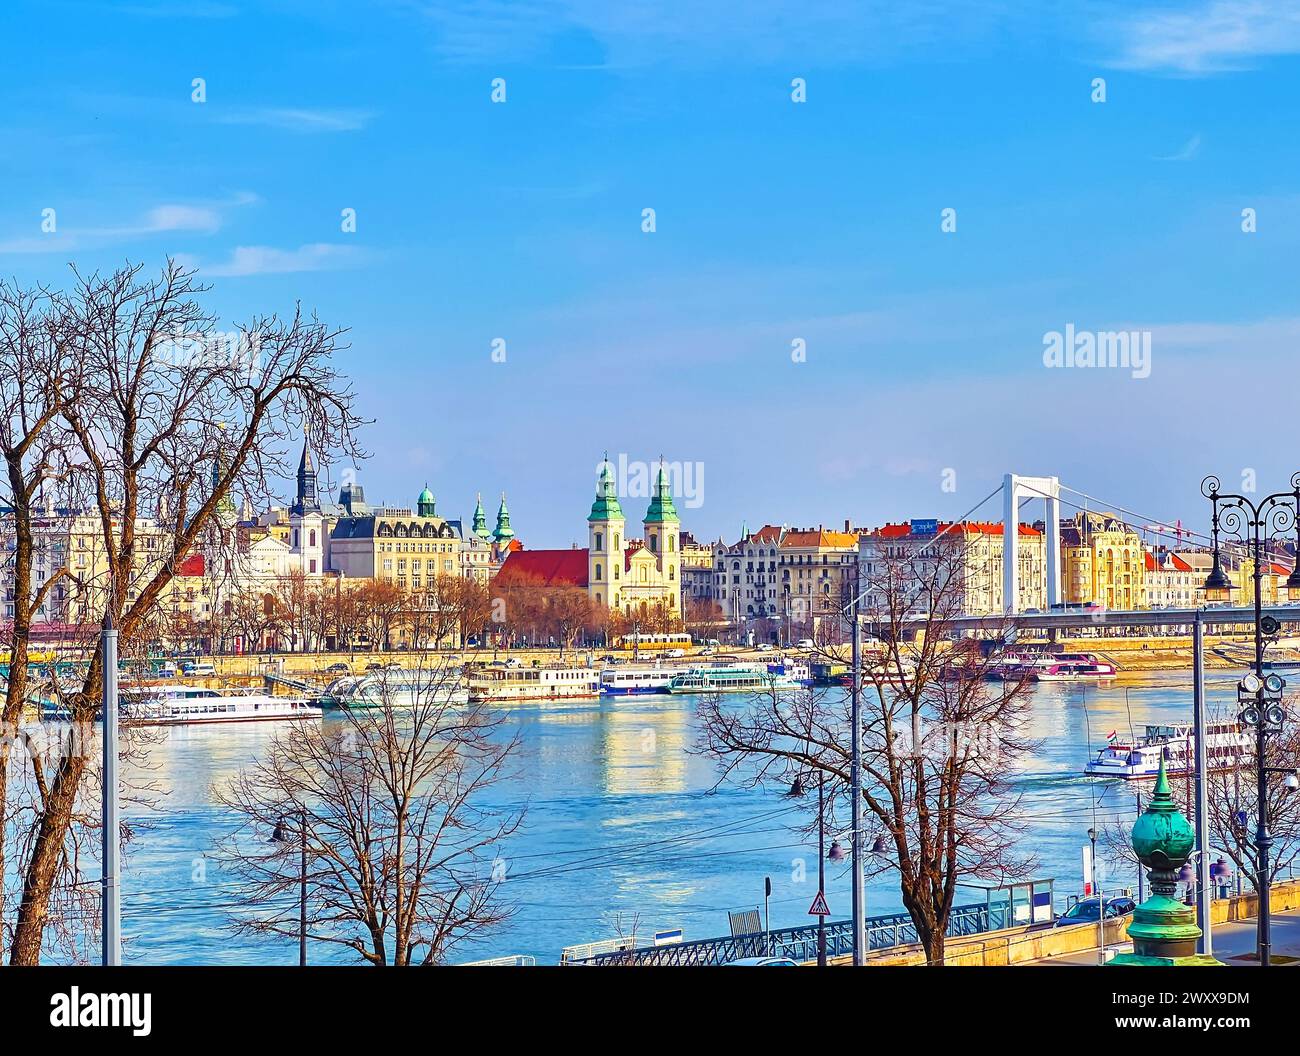 Danube riverside view of Pest with Inner City Parish Church, Assumption of the Blessed Virgin Mary Cathedral and Elisabeth Bridge, Budapest, Hungary Stock Photo